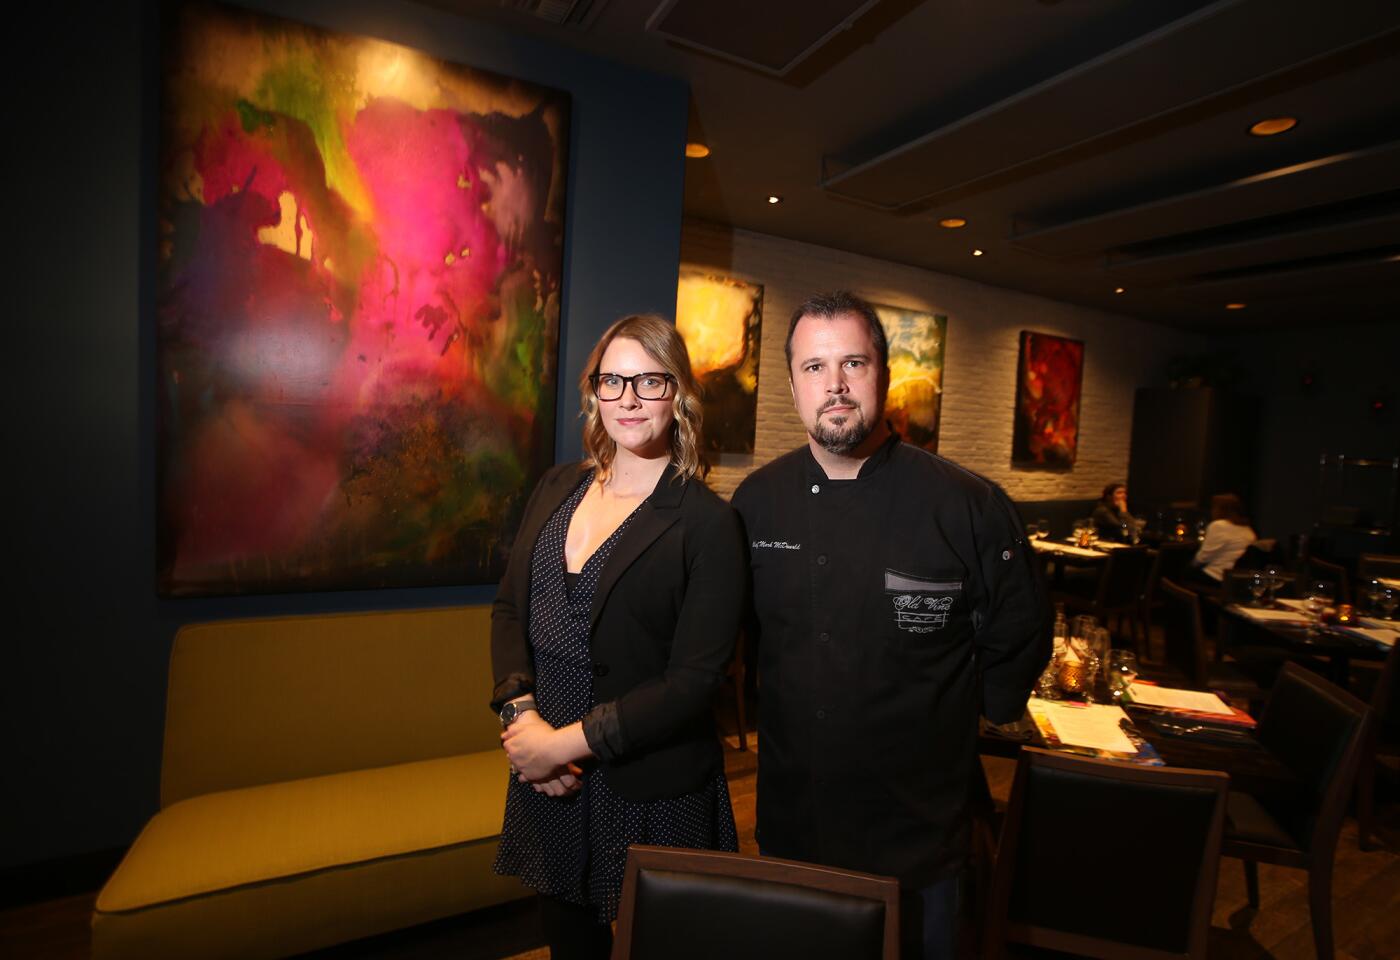 Co-owners Kate Perry and chef Mark McDonald stand in the dining room of Old Vine Kitchen + Bar in Costa Mesa. Paul Kole's artwork adorns the walls.